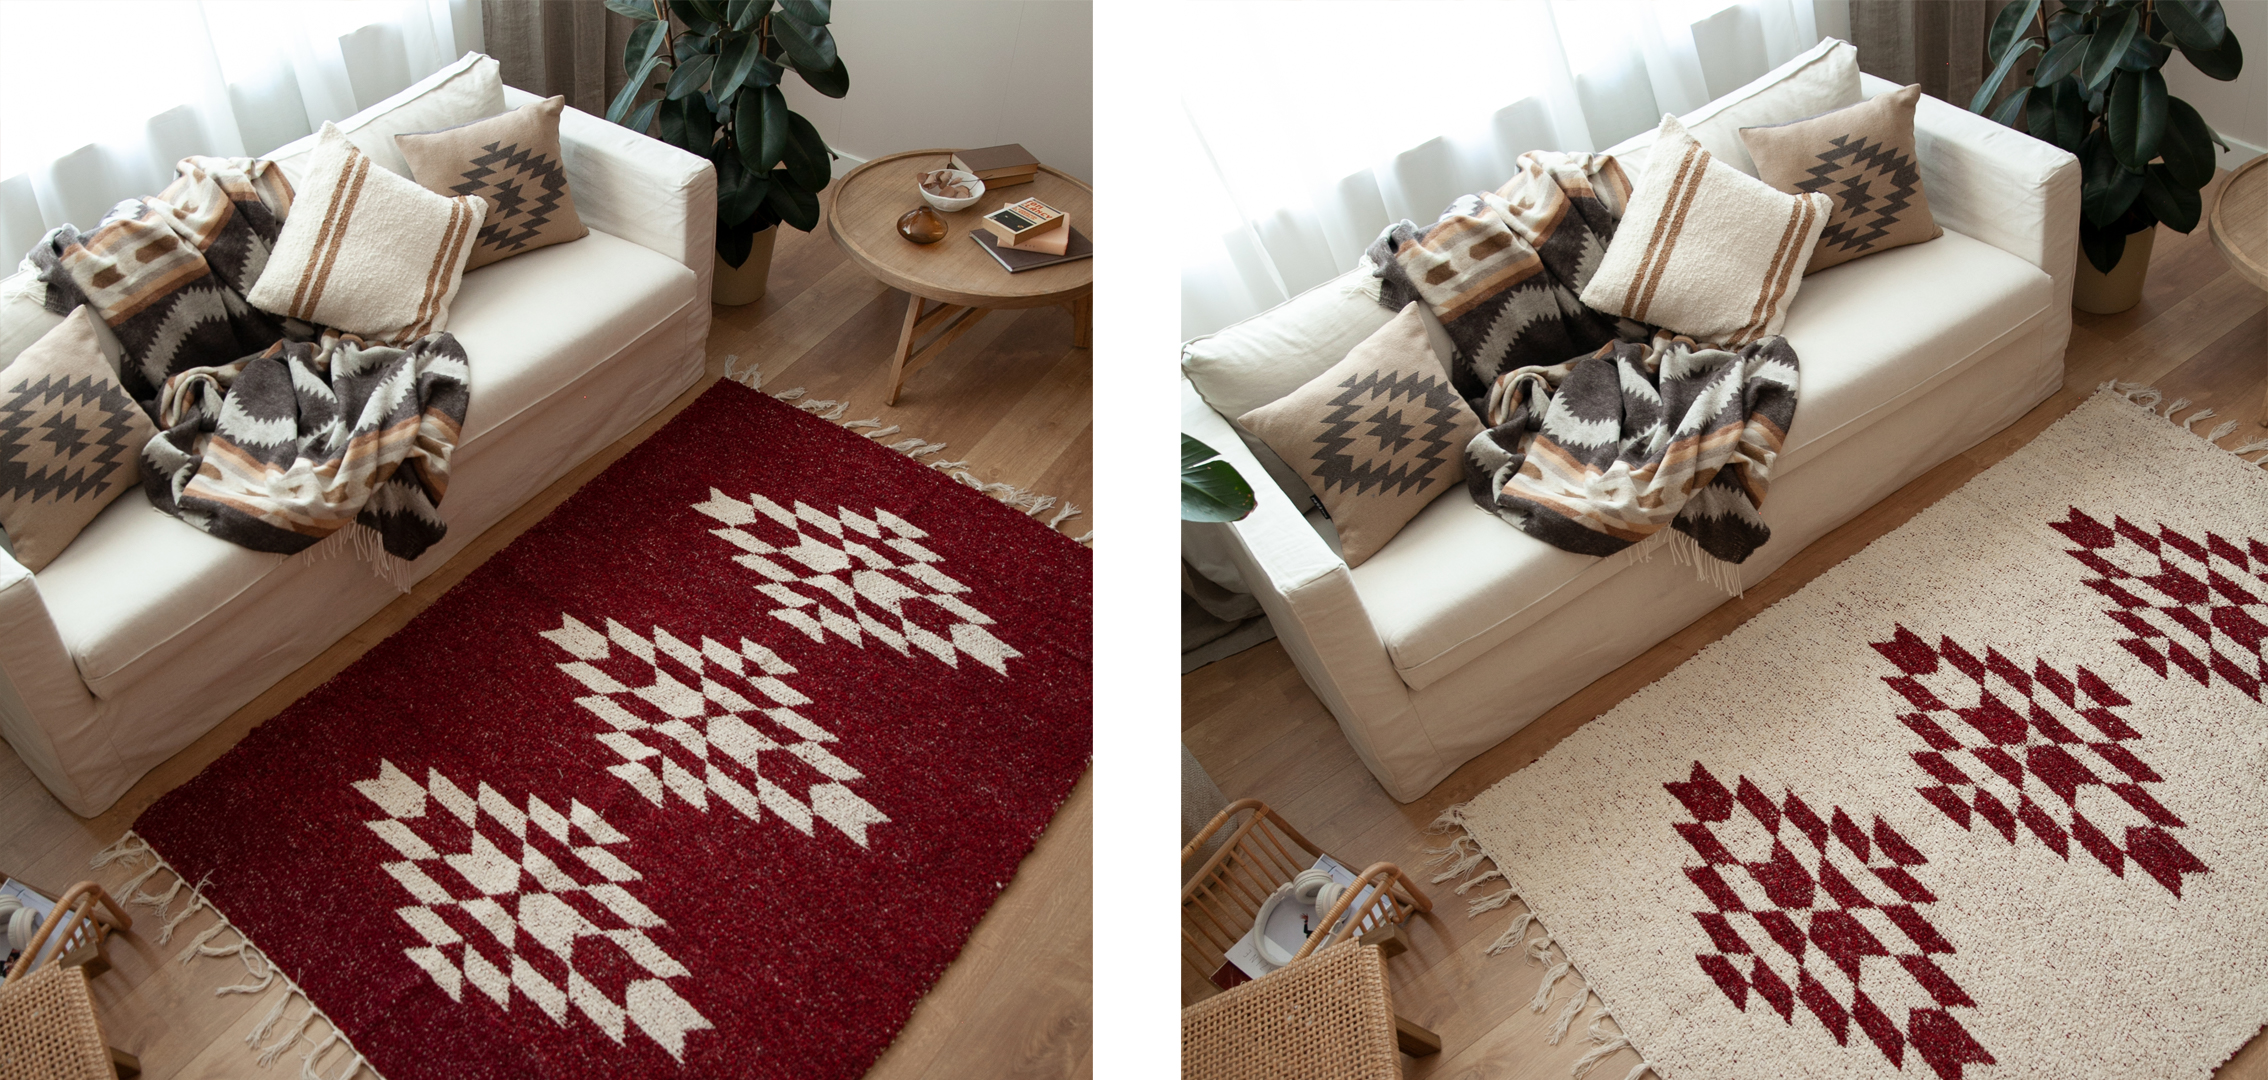 Living rooms decorated with ethnic textiles